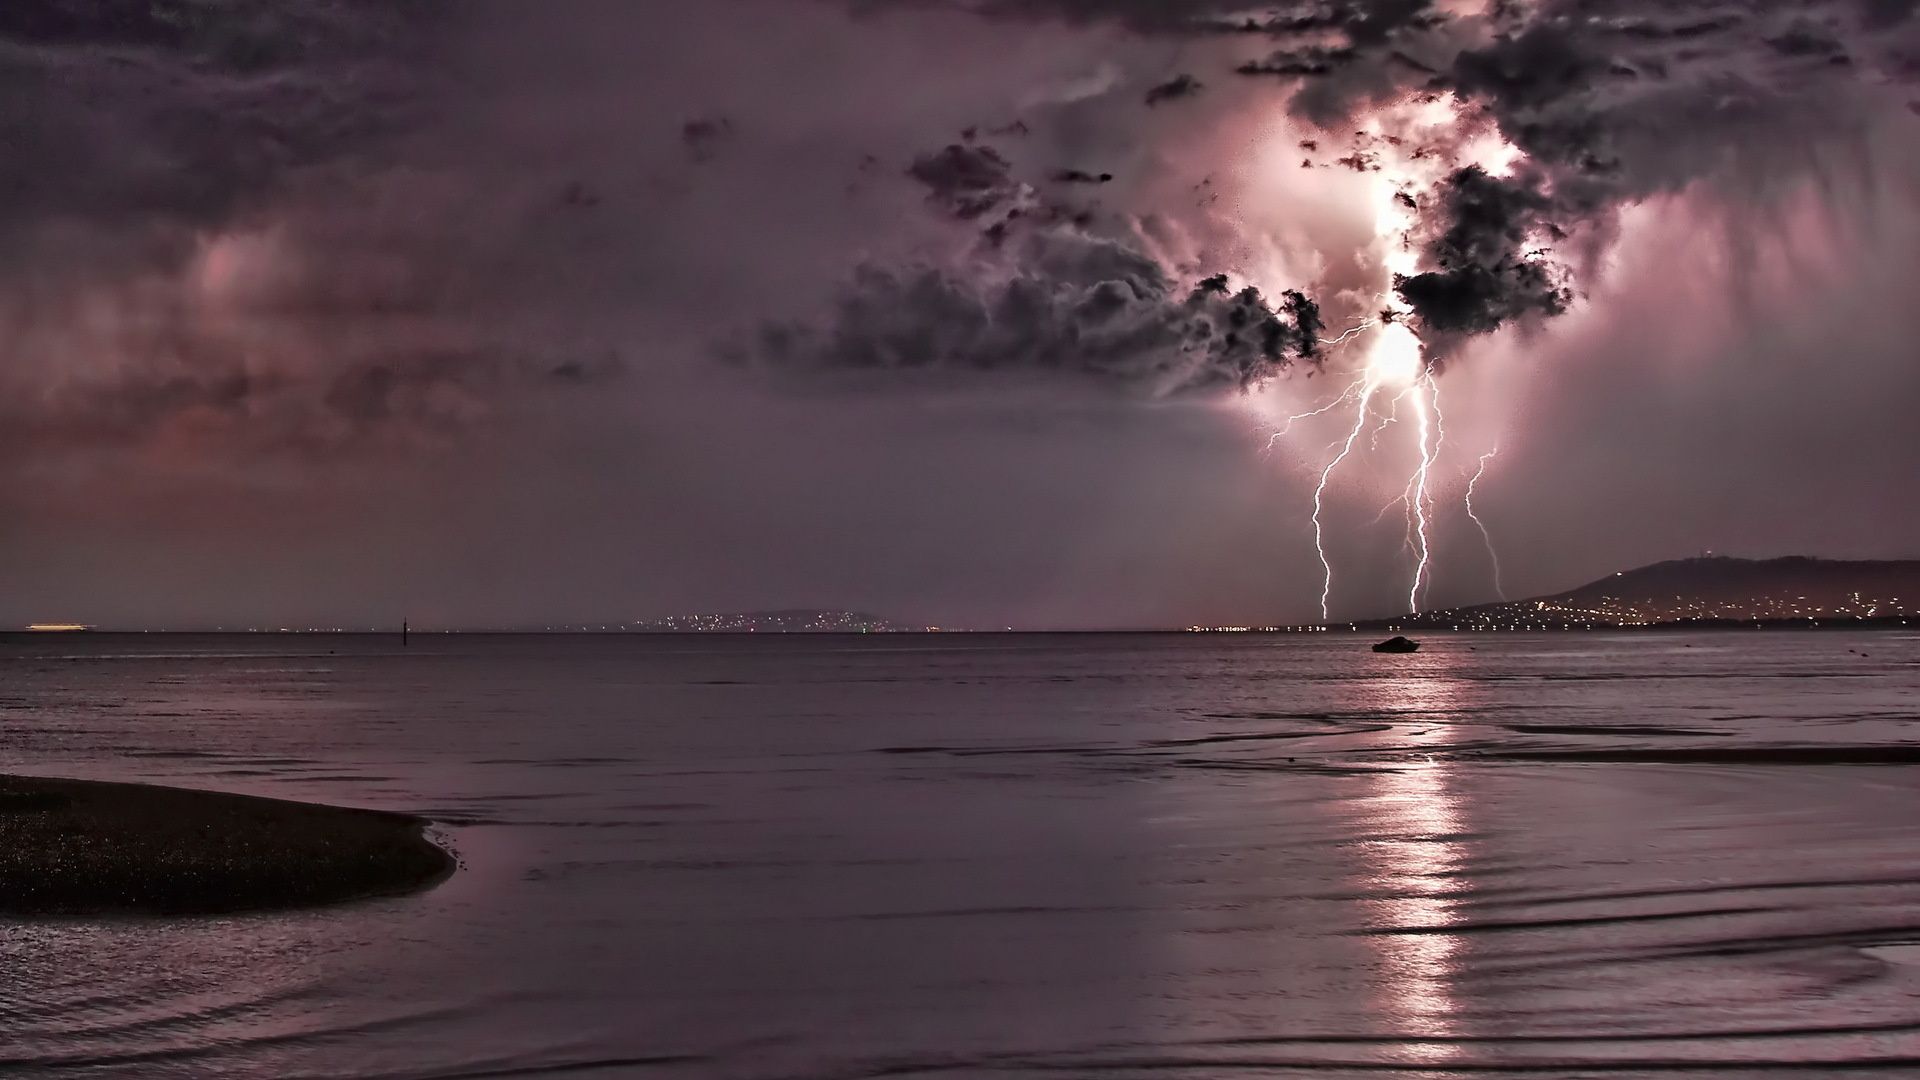 lightning, Storm, Rain, Clouds, Electric, Water, Reflection